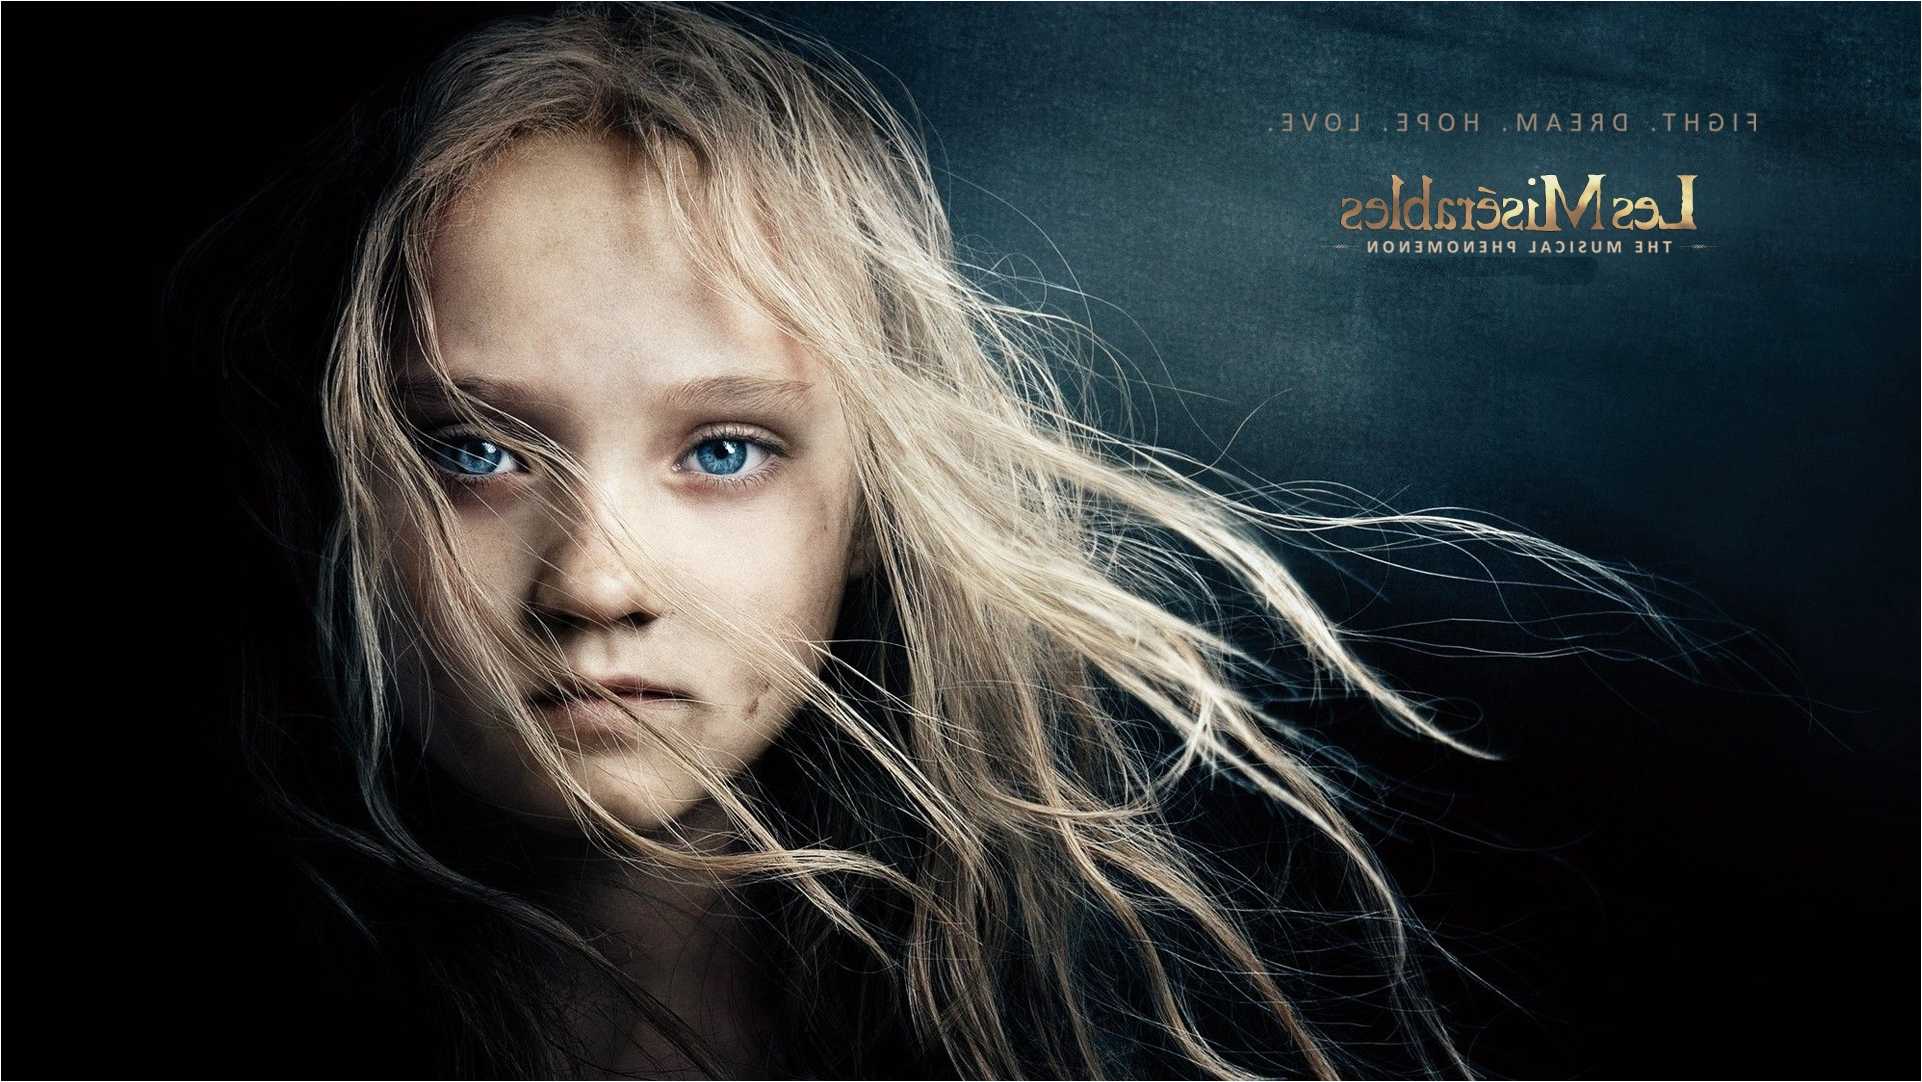 les miserables full movie download